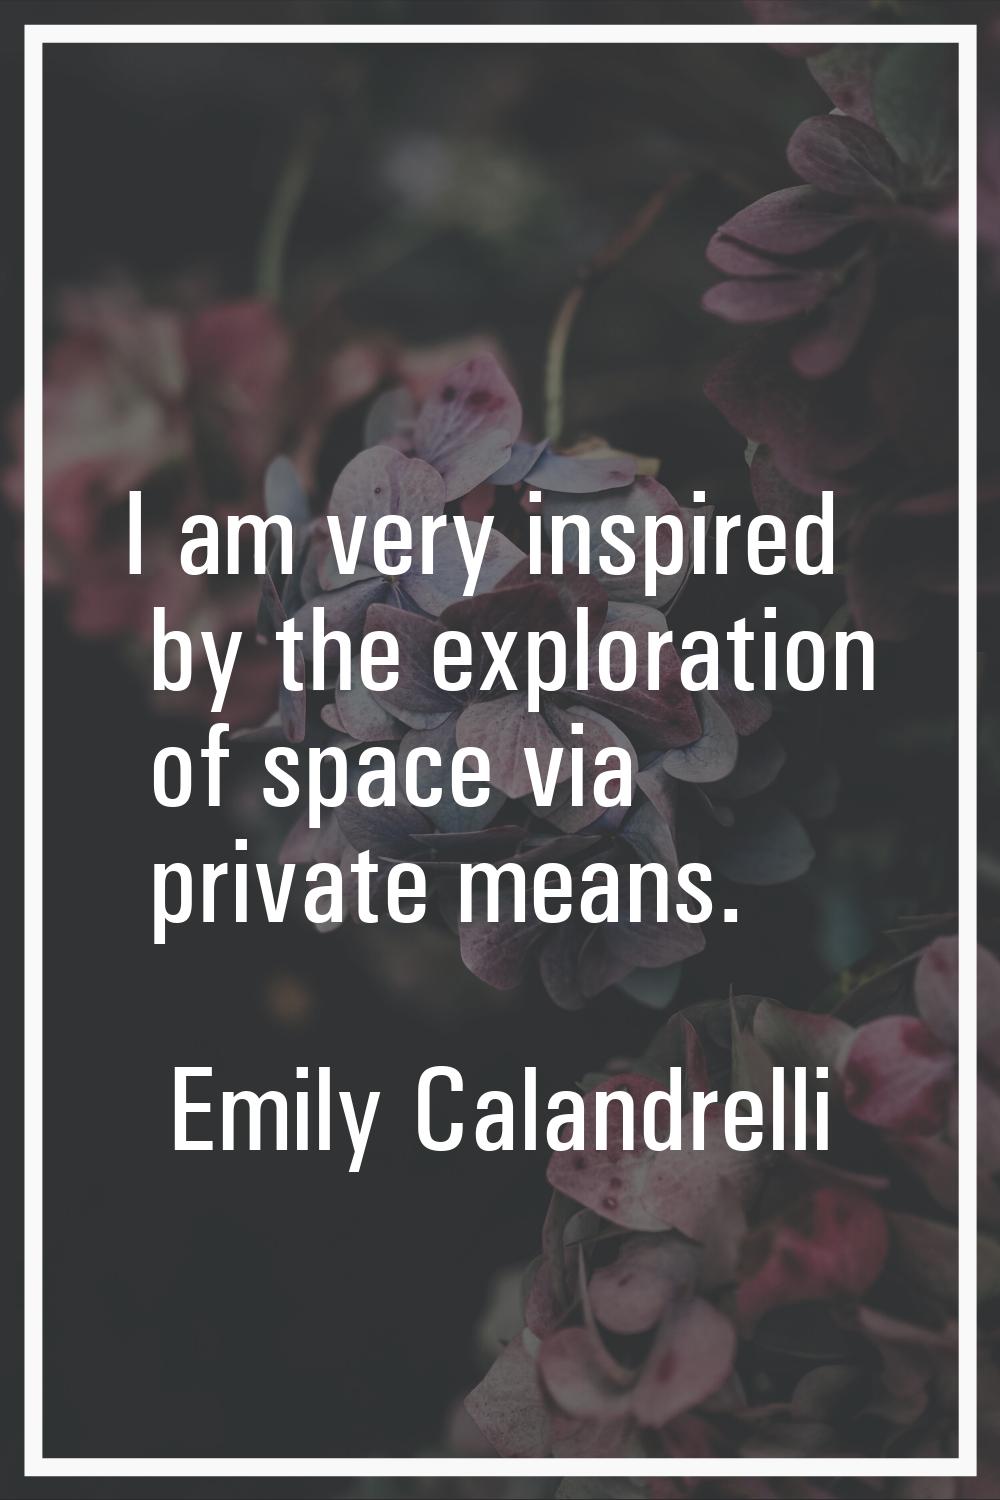 I am very inspired by the exploration of space via private means.